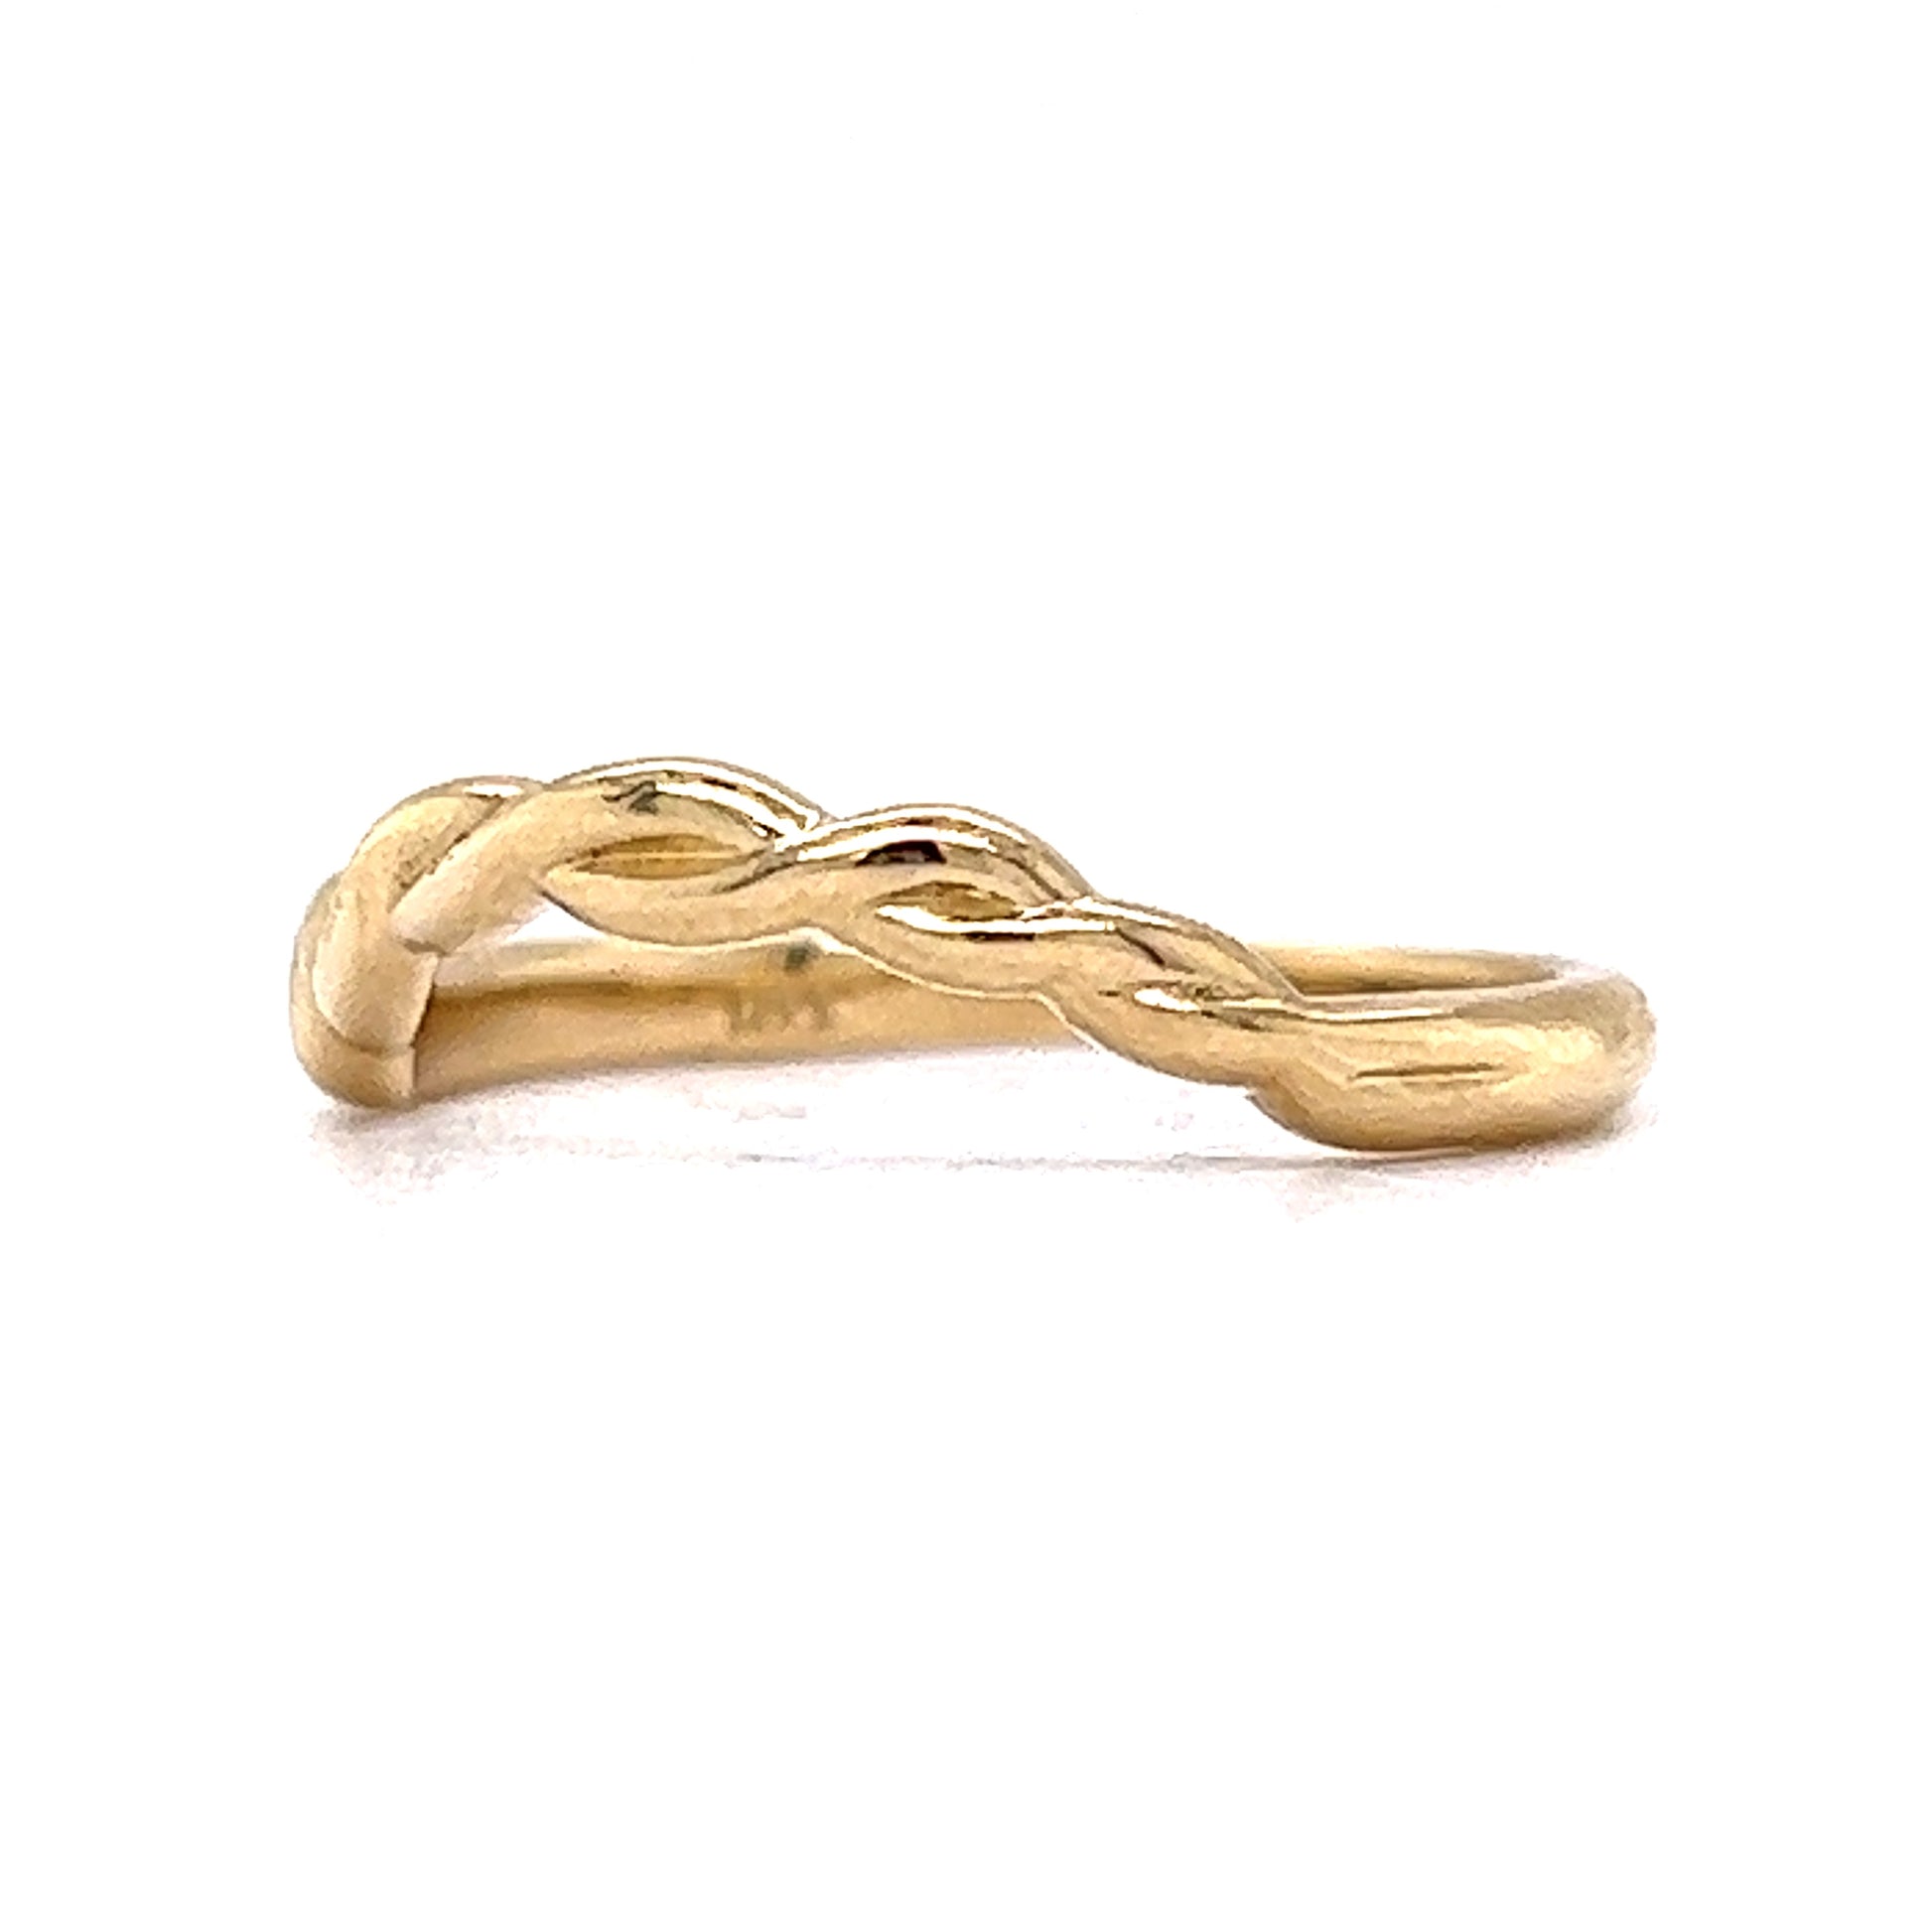 Curved braided Rope Style Wedding Band in 14k Yellow GoldComposition: 14 Karat Yellow GoldRing Size: 7.0Total Gram Weight: 2.2 gInscription: 14k